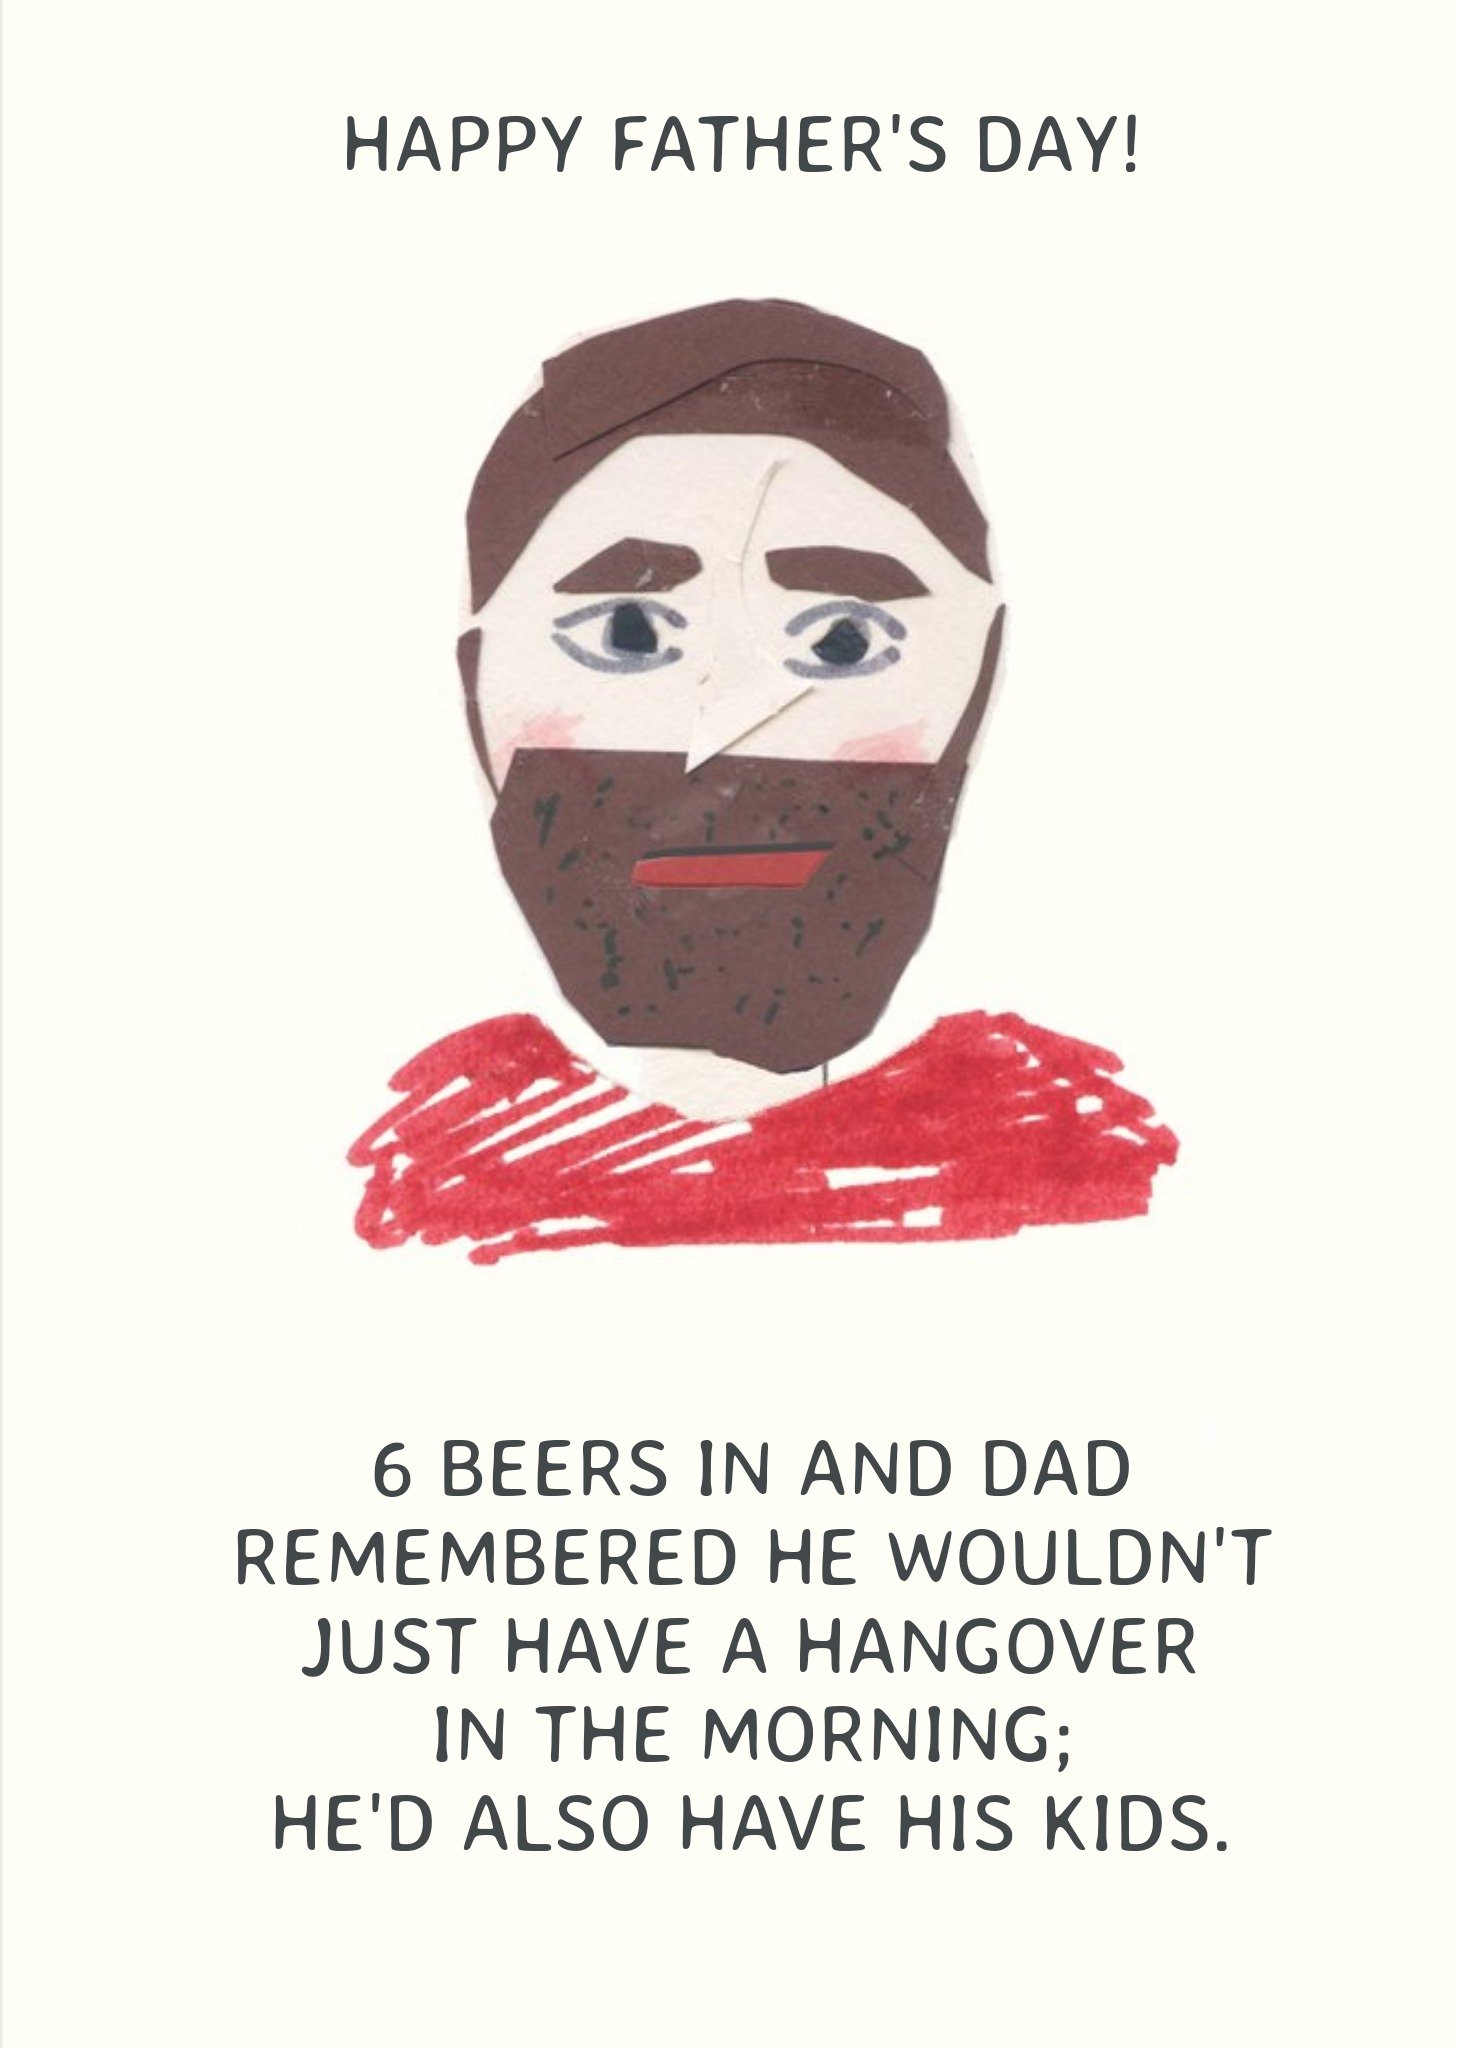 Moonpig Dad Would Have A Hangover And His Kids Funny Father's Day Card, Large